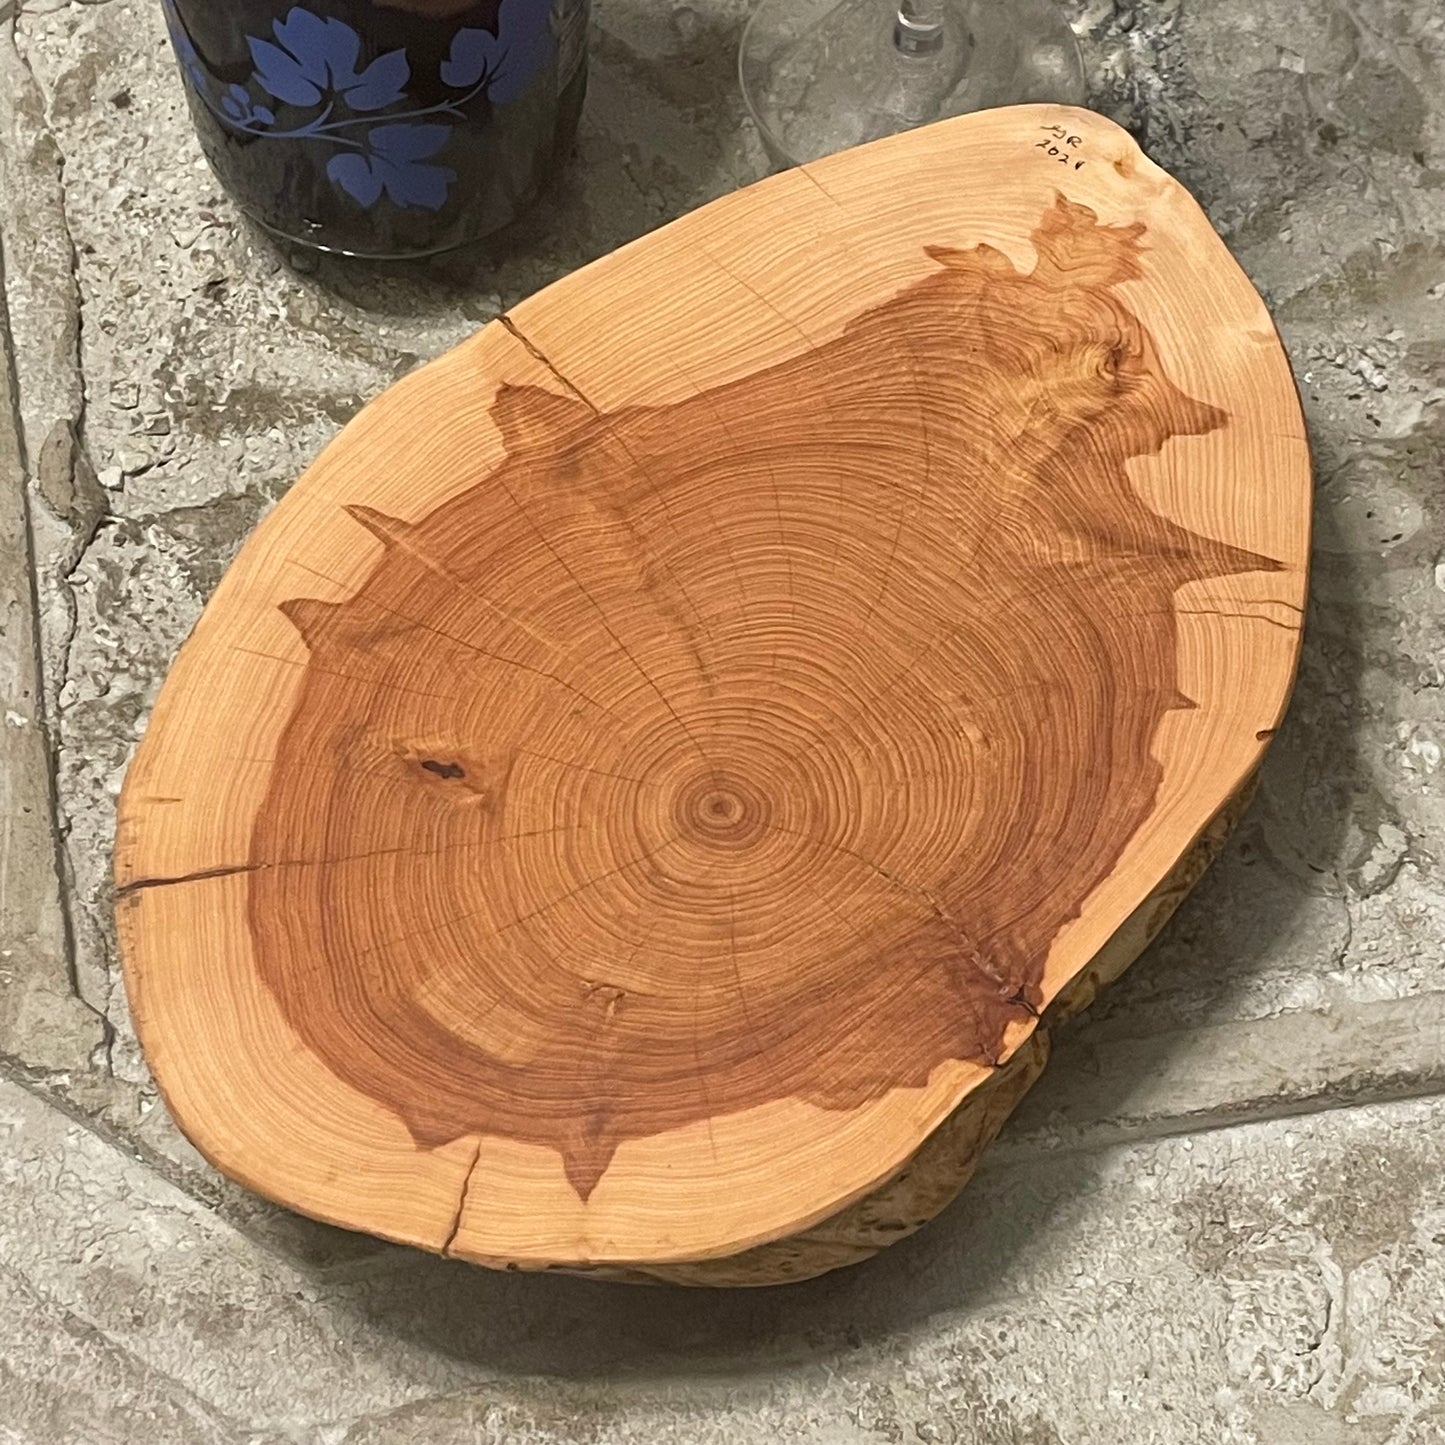 Live Edge Juniper Wood Charcuterie Board Small Oval/10-11" Hand Crafted Entertaining Party Hosting Holiday Gift Idea Housewarming